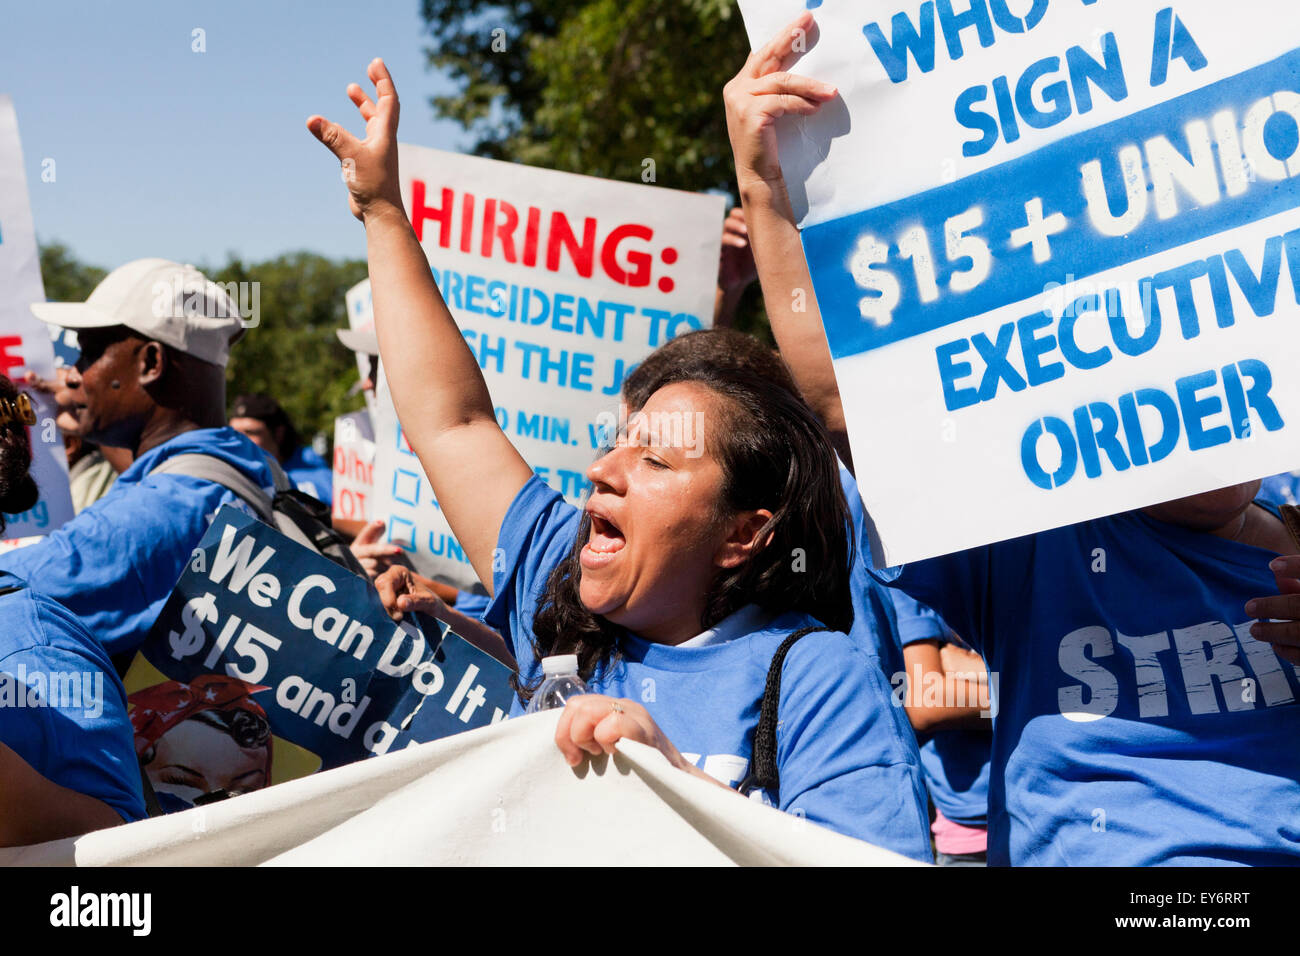 Washington DC, USA. 22nd July, 2015. Hundreds of federal contract workers strike outside the US Capitol building to protest poverty jobs. US Senator Bernie Sanders (I-VT) announced that he is introducing a $15 national minimum wage bill in the senate to help these workers. Credit:  B Christopher/Alamy Live News Stock Photo